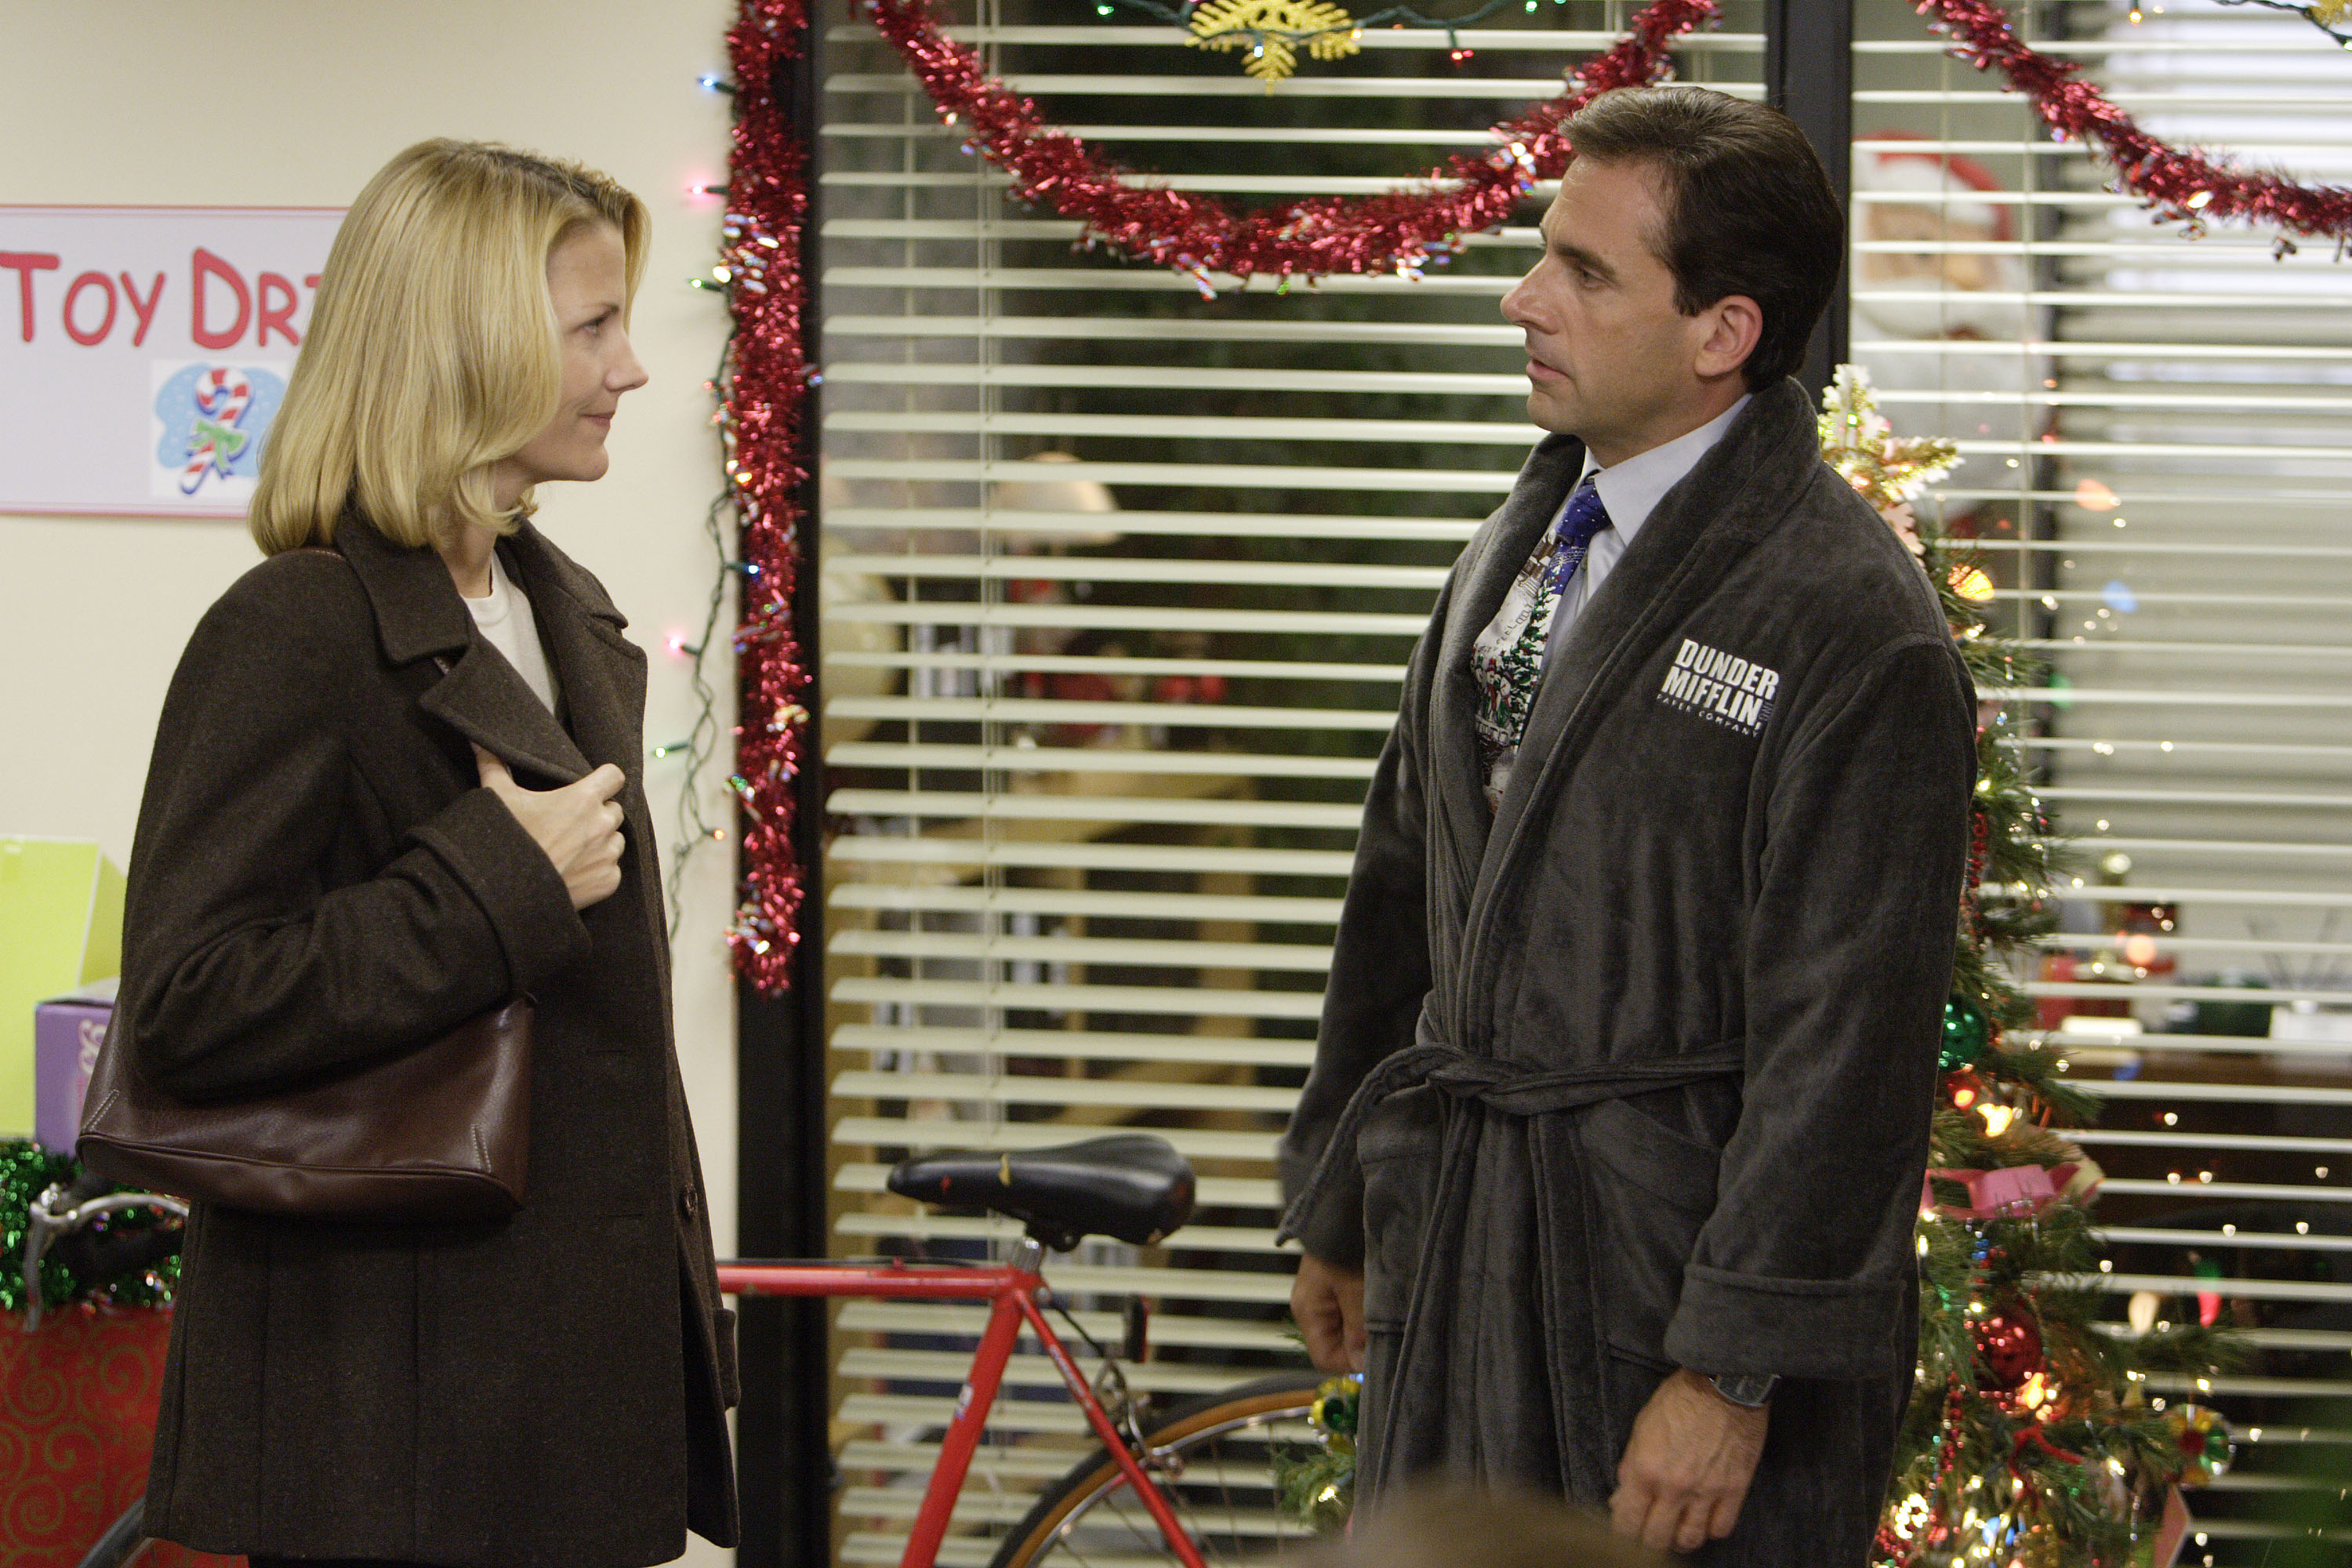 After sending Carol (Nancy Carell) a Christmas card of her and her children photoshopped with him on a ski mountain, she breaks up with Michael (Steve Carell) in "A Benihana Christmas."